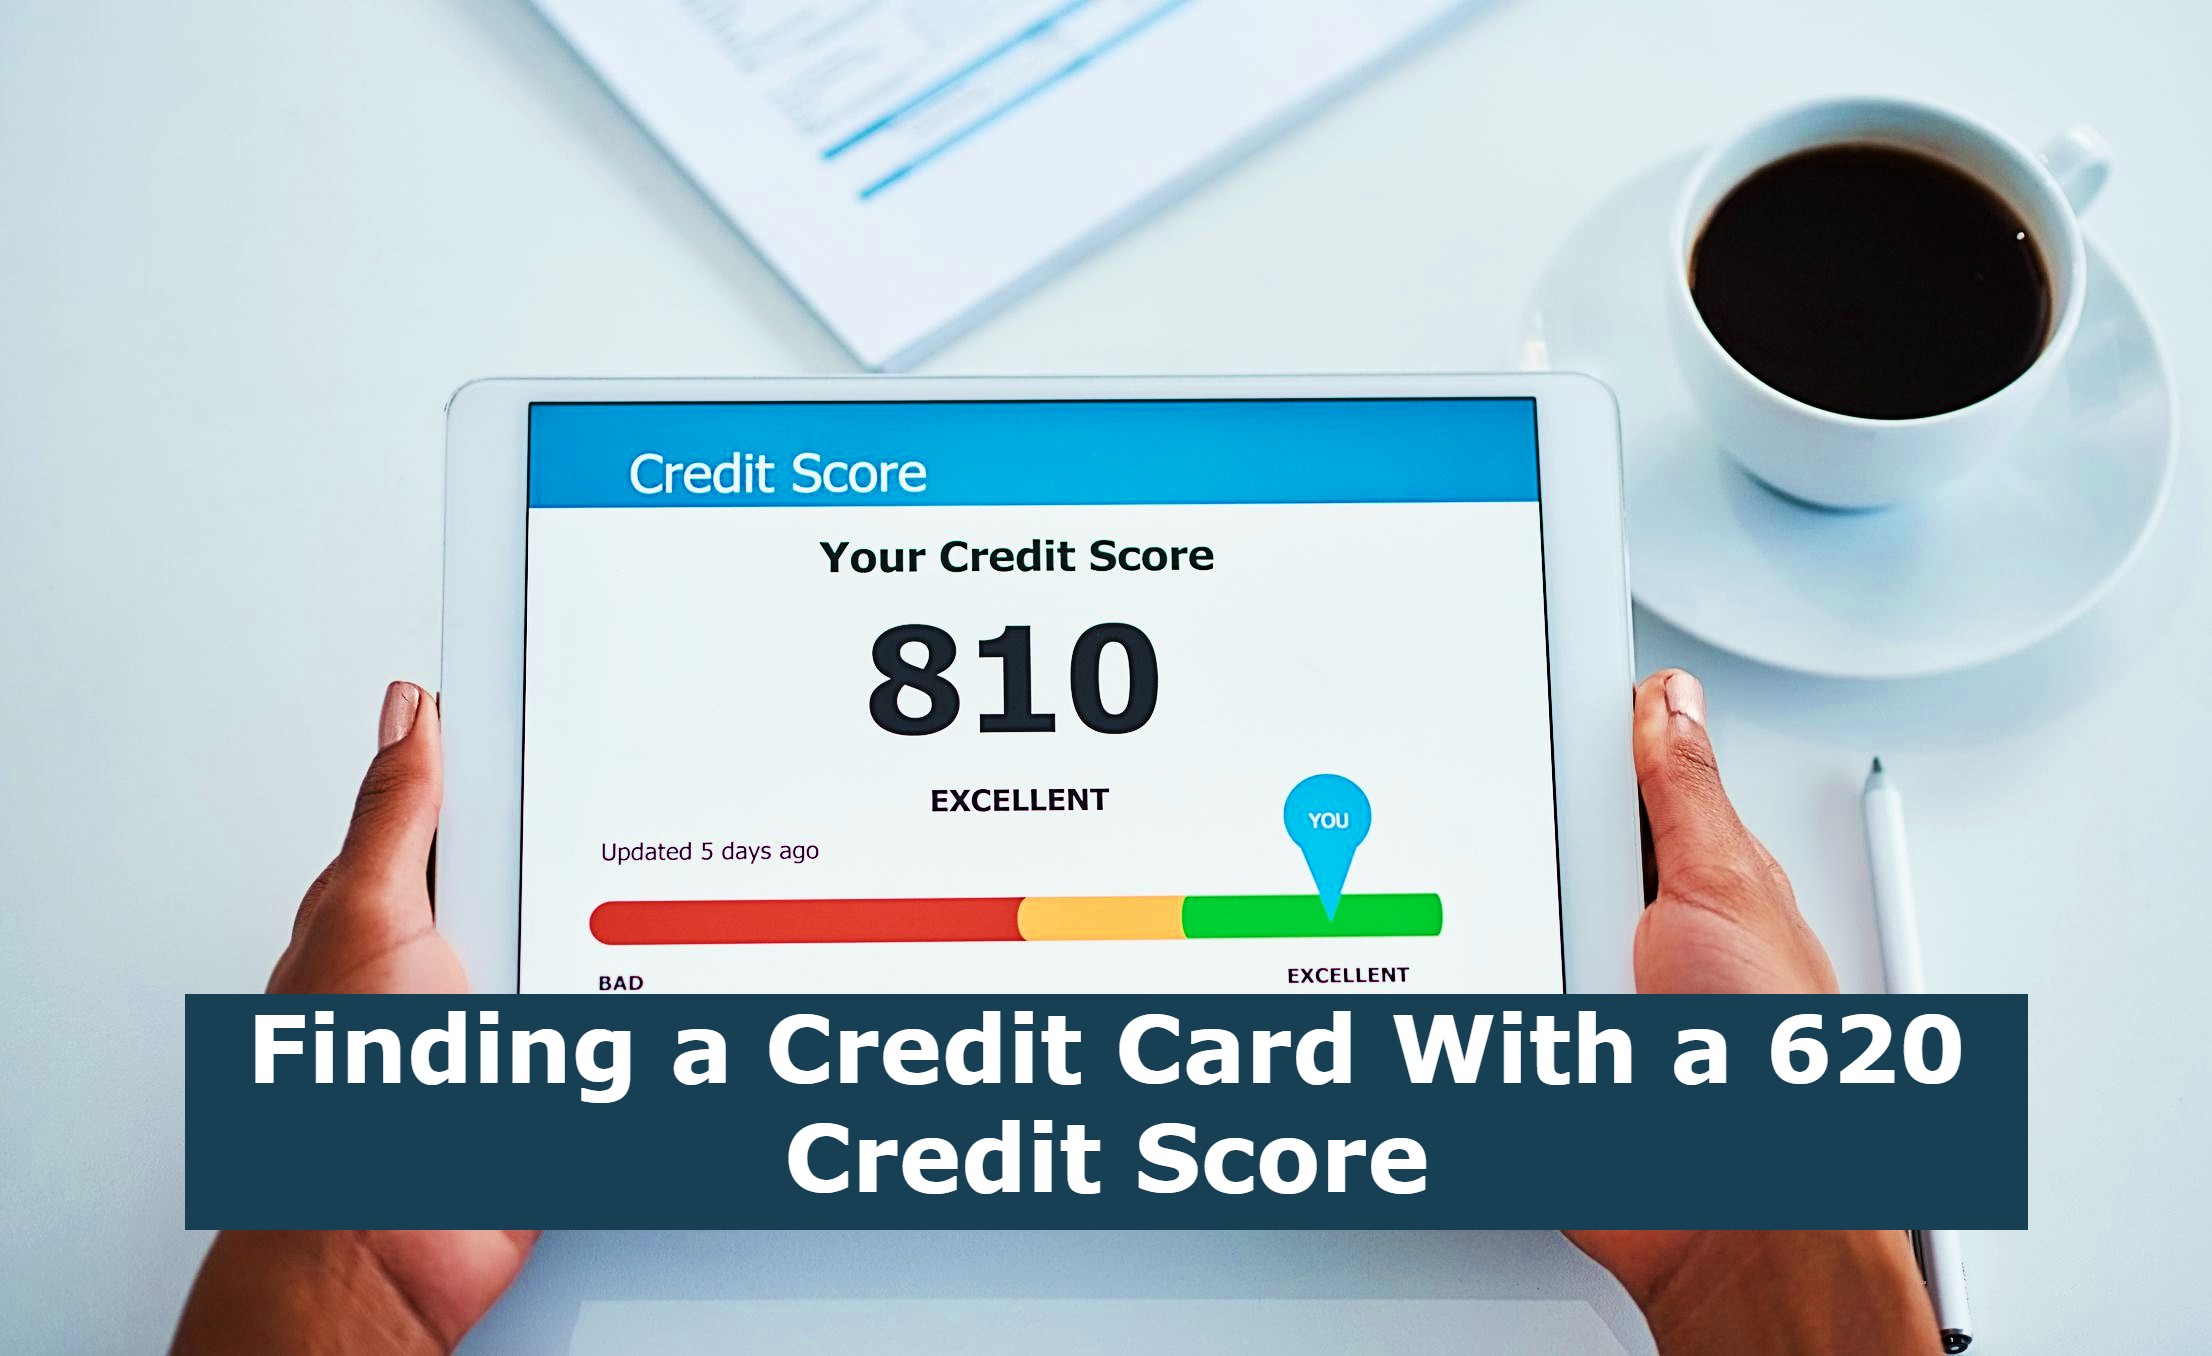 Finding a Credit Card With a 620 Credit Score